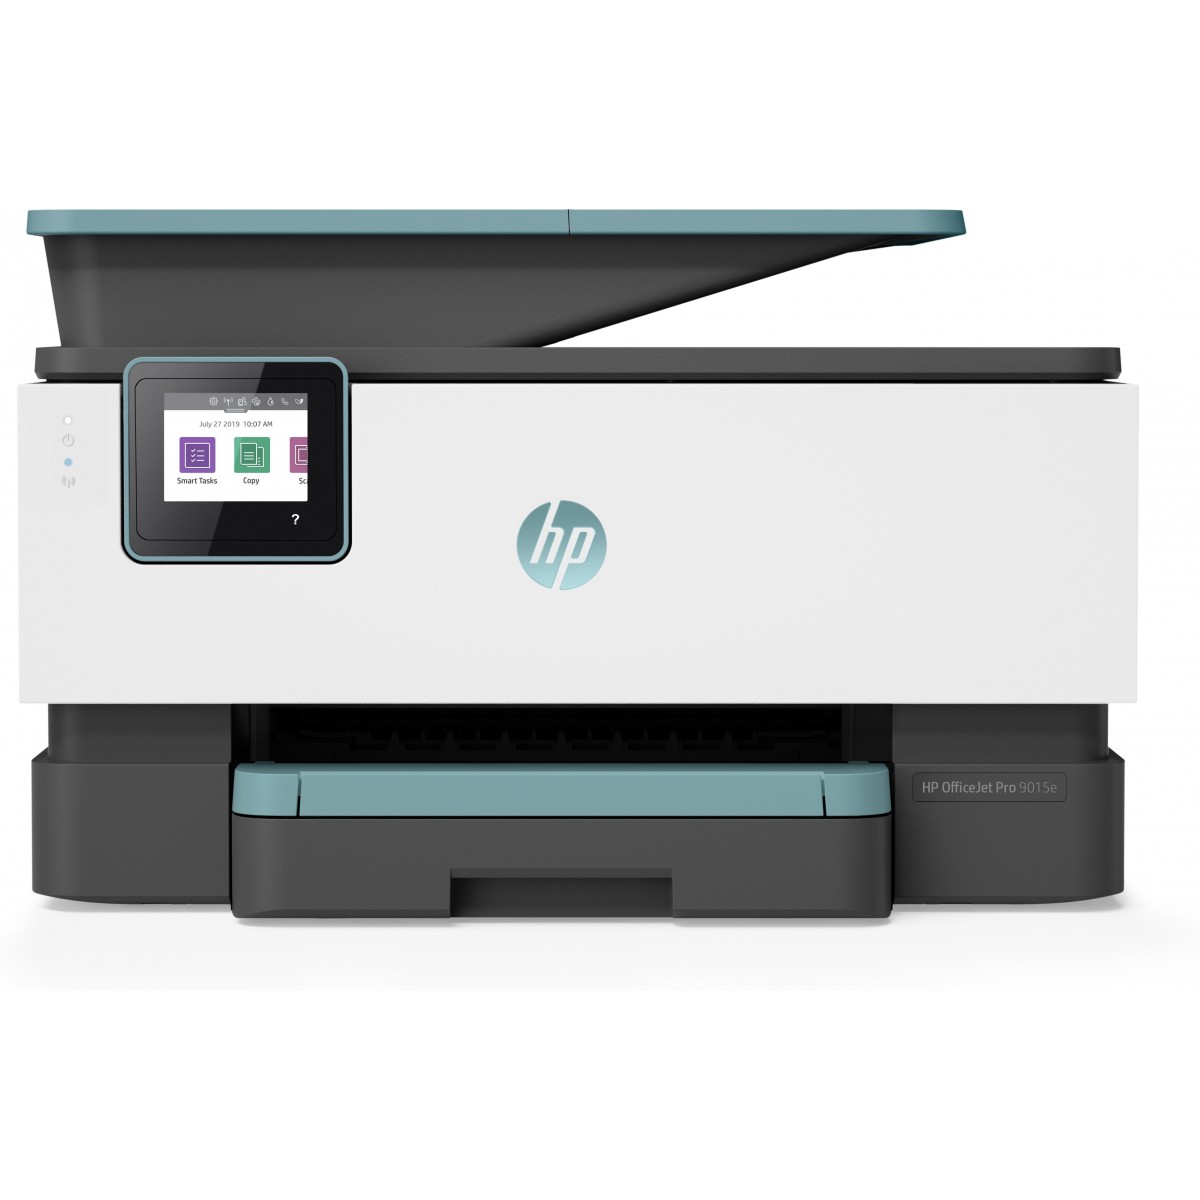 HP OfficeJet Pro 9015e - Thermal inkjet - Colour printing - 4800 x 1200 DPI - A4 - Direct printing - Grey - White